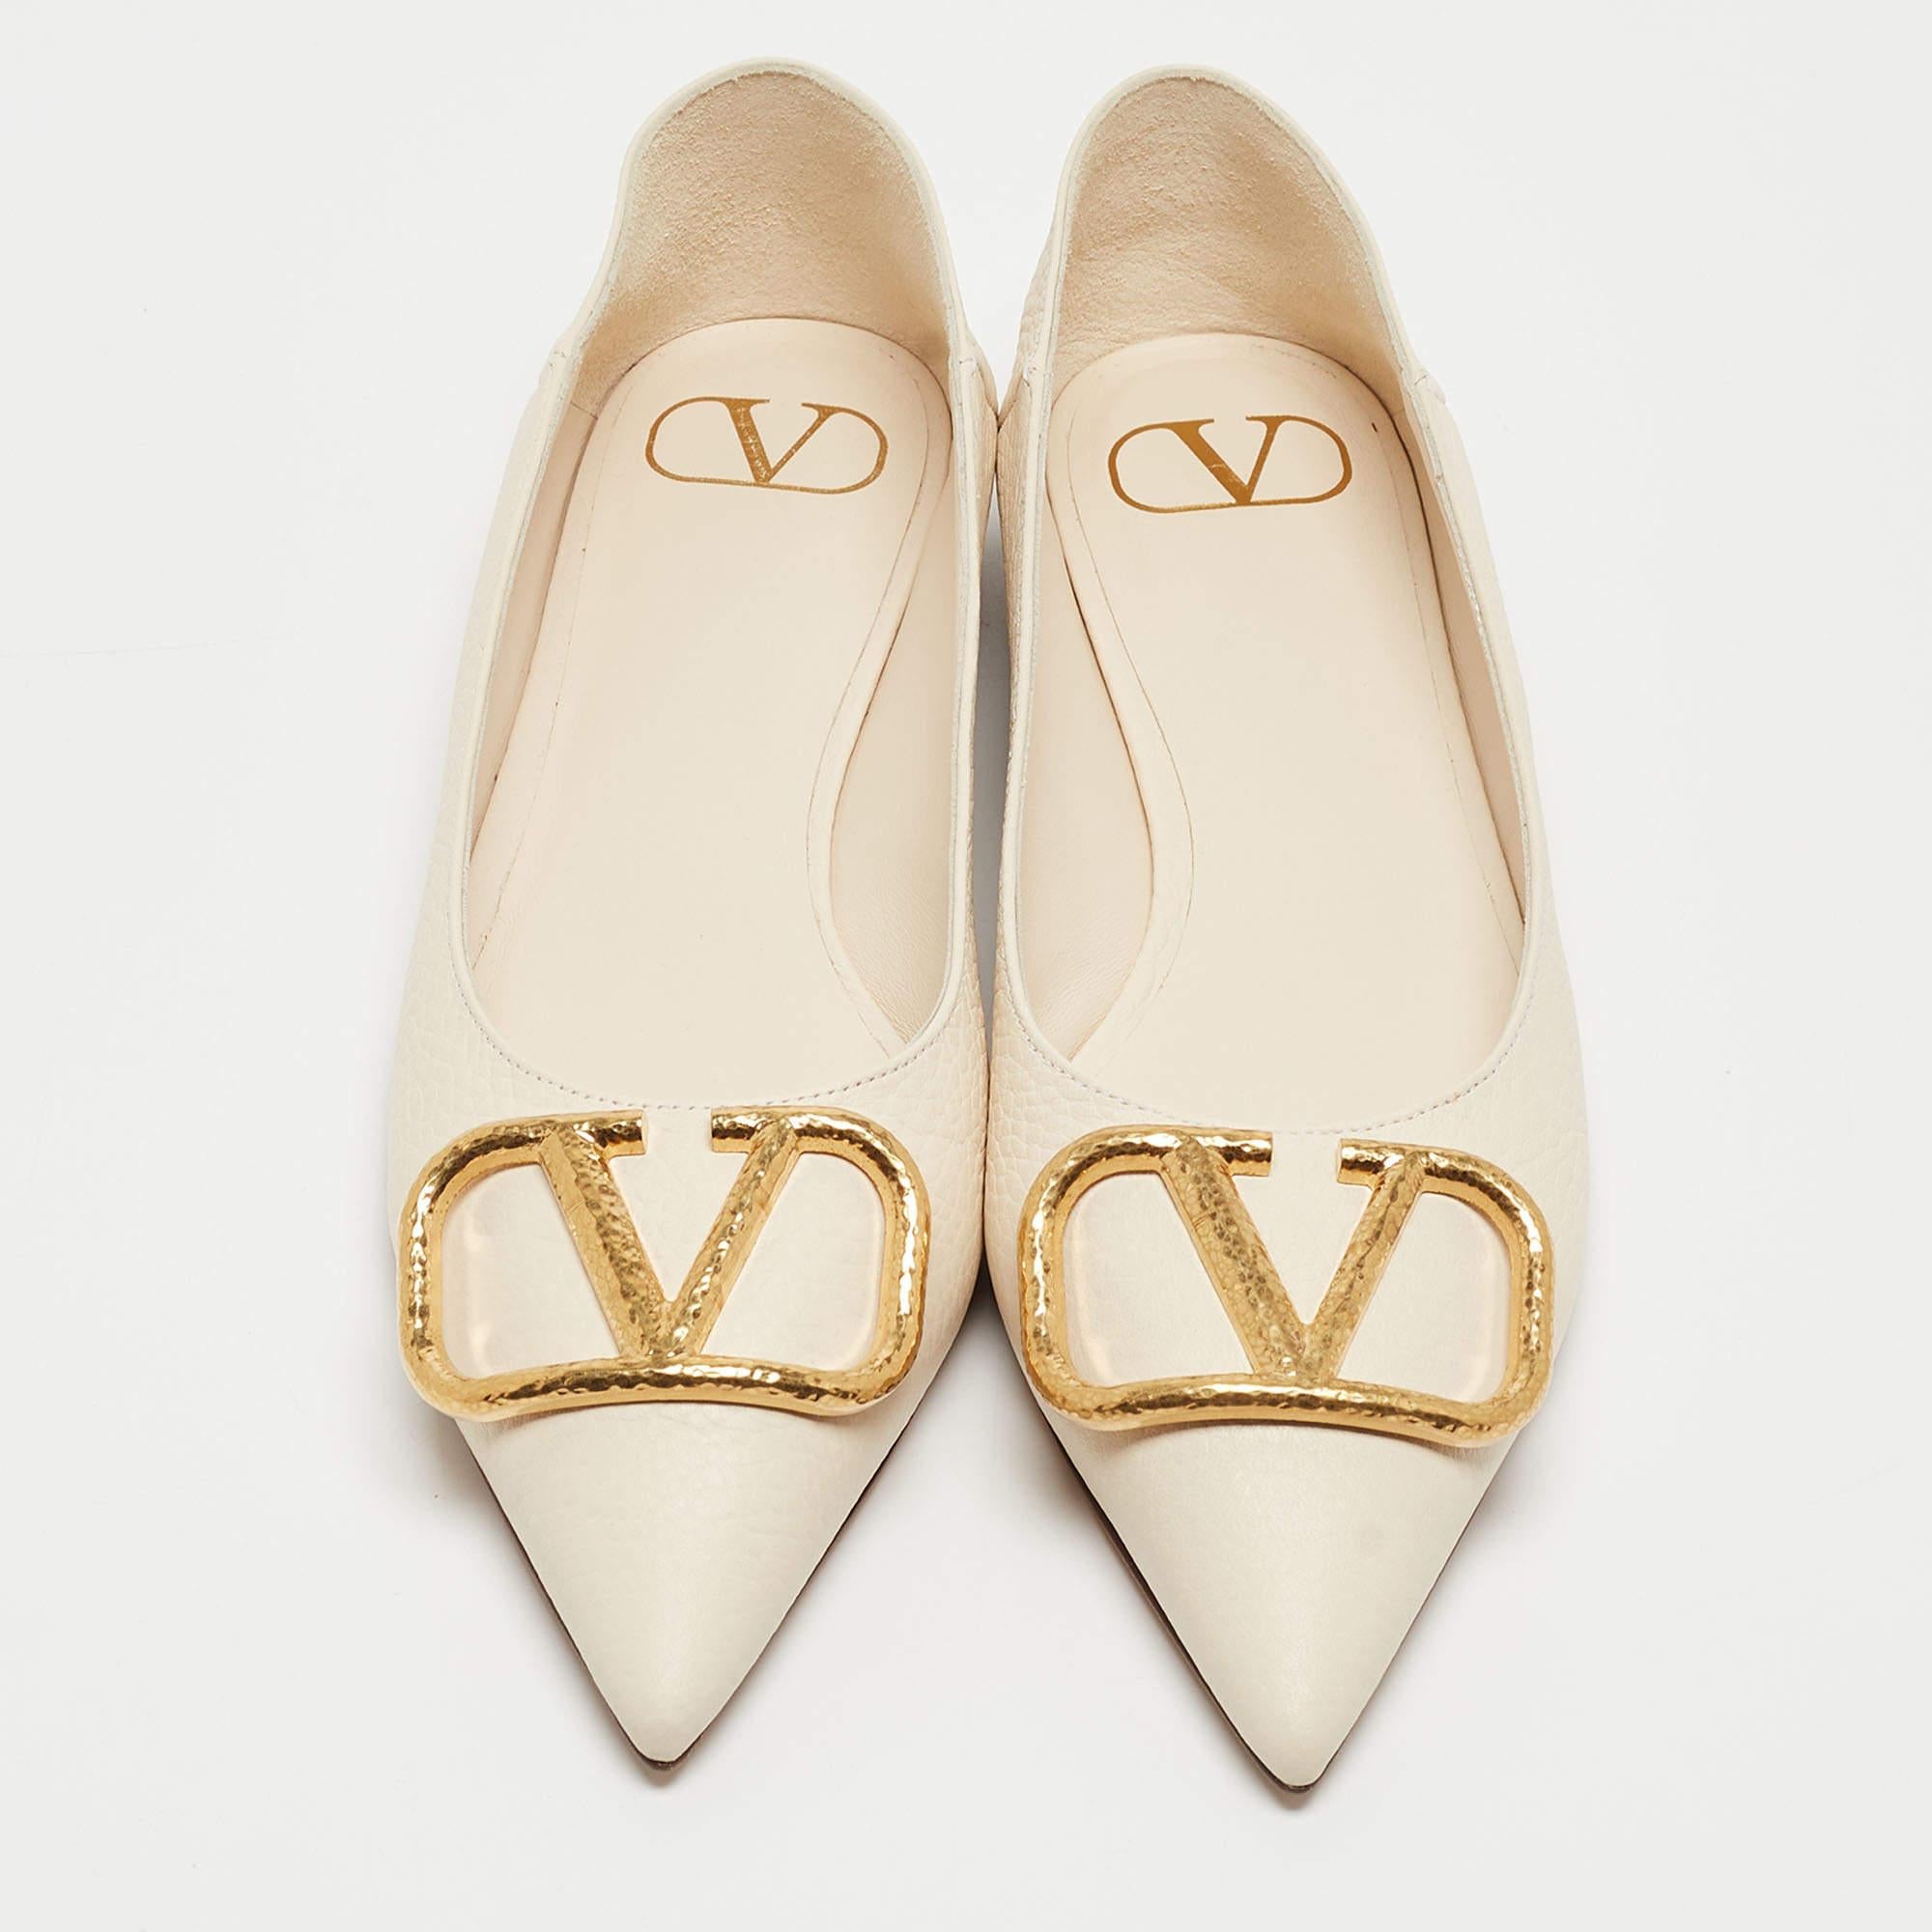 Complete your look by adding these Valentino VLogo ballet flats to your lovely wardrobe. They are crafted skilfully to grant the perfect fit and style.

Includes: Original Box, Info Booklet

